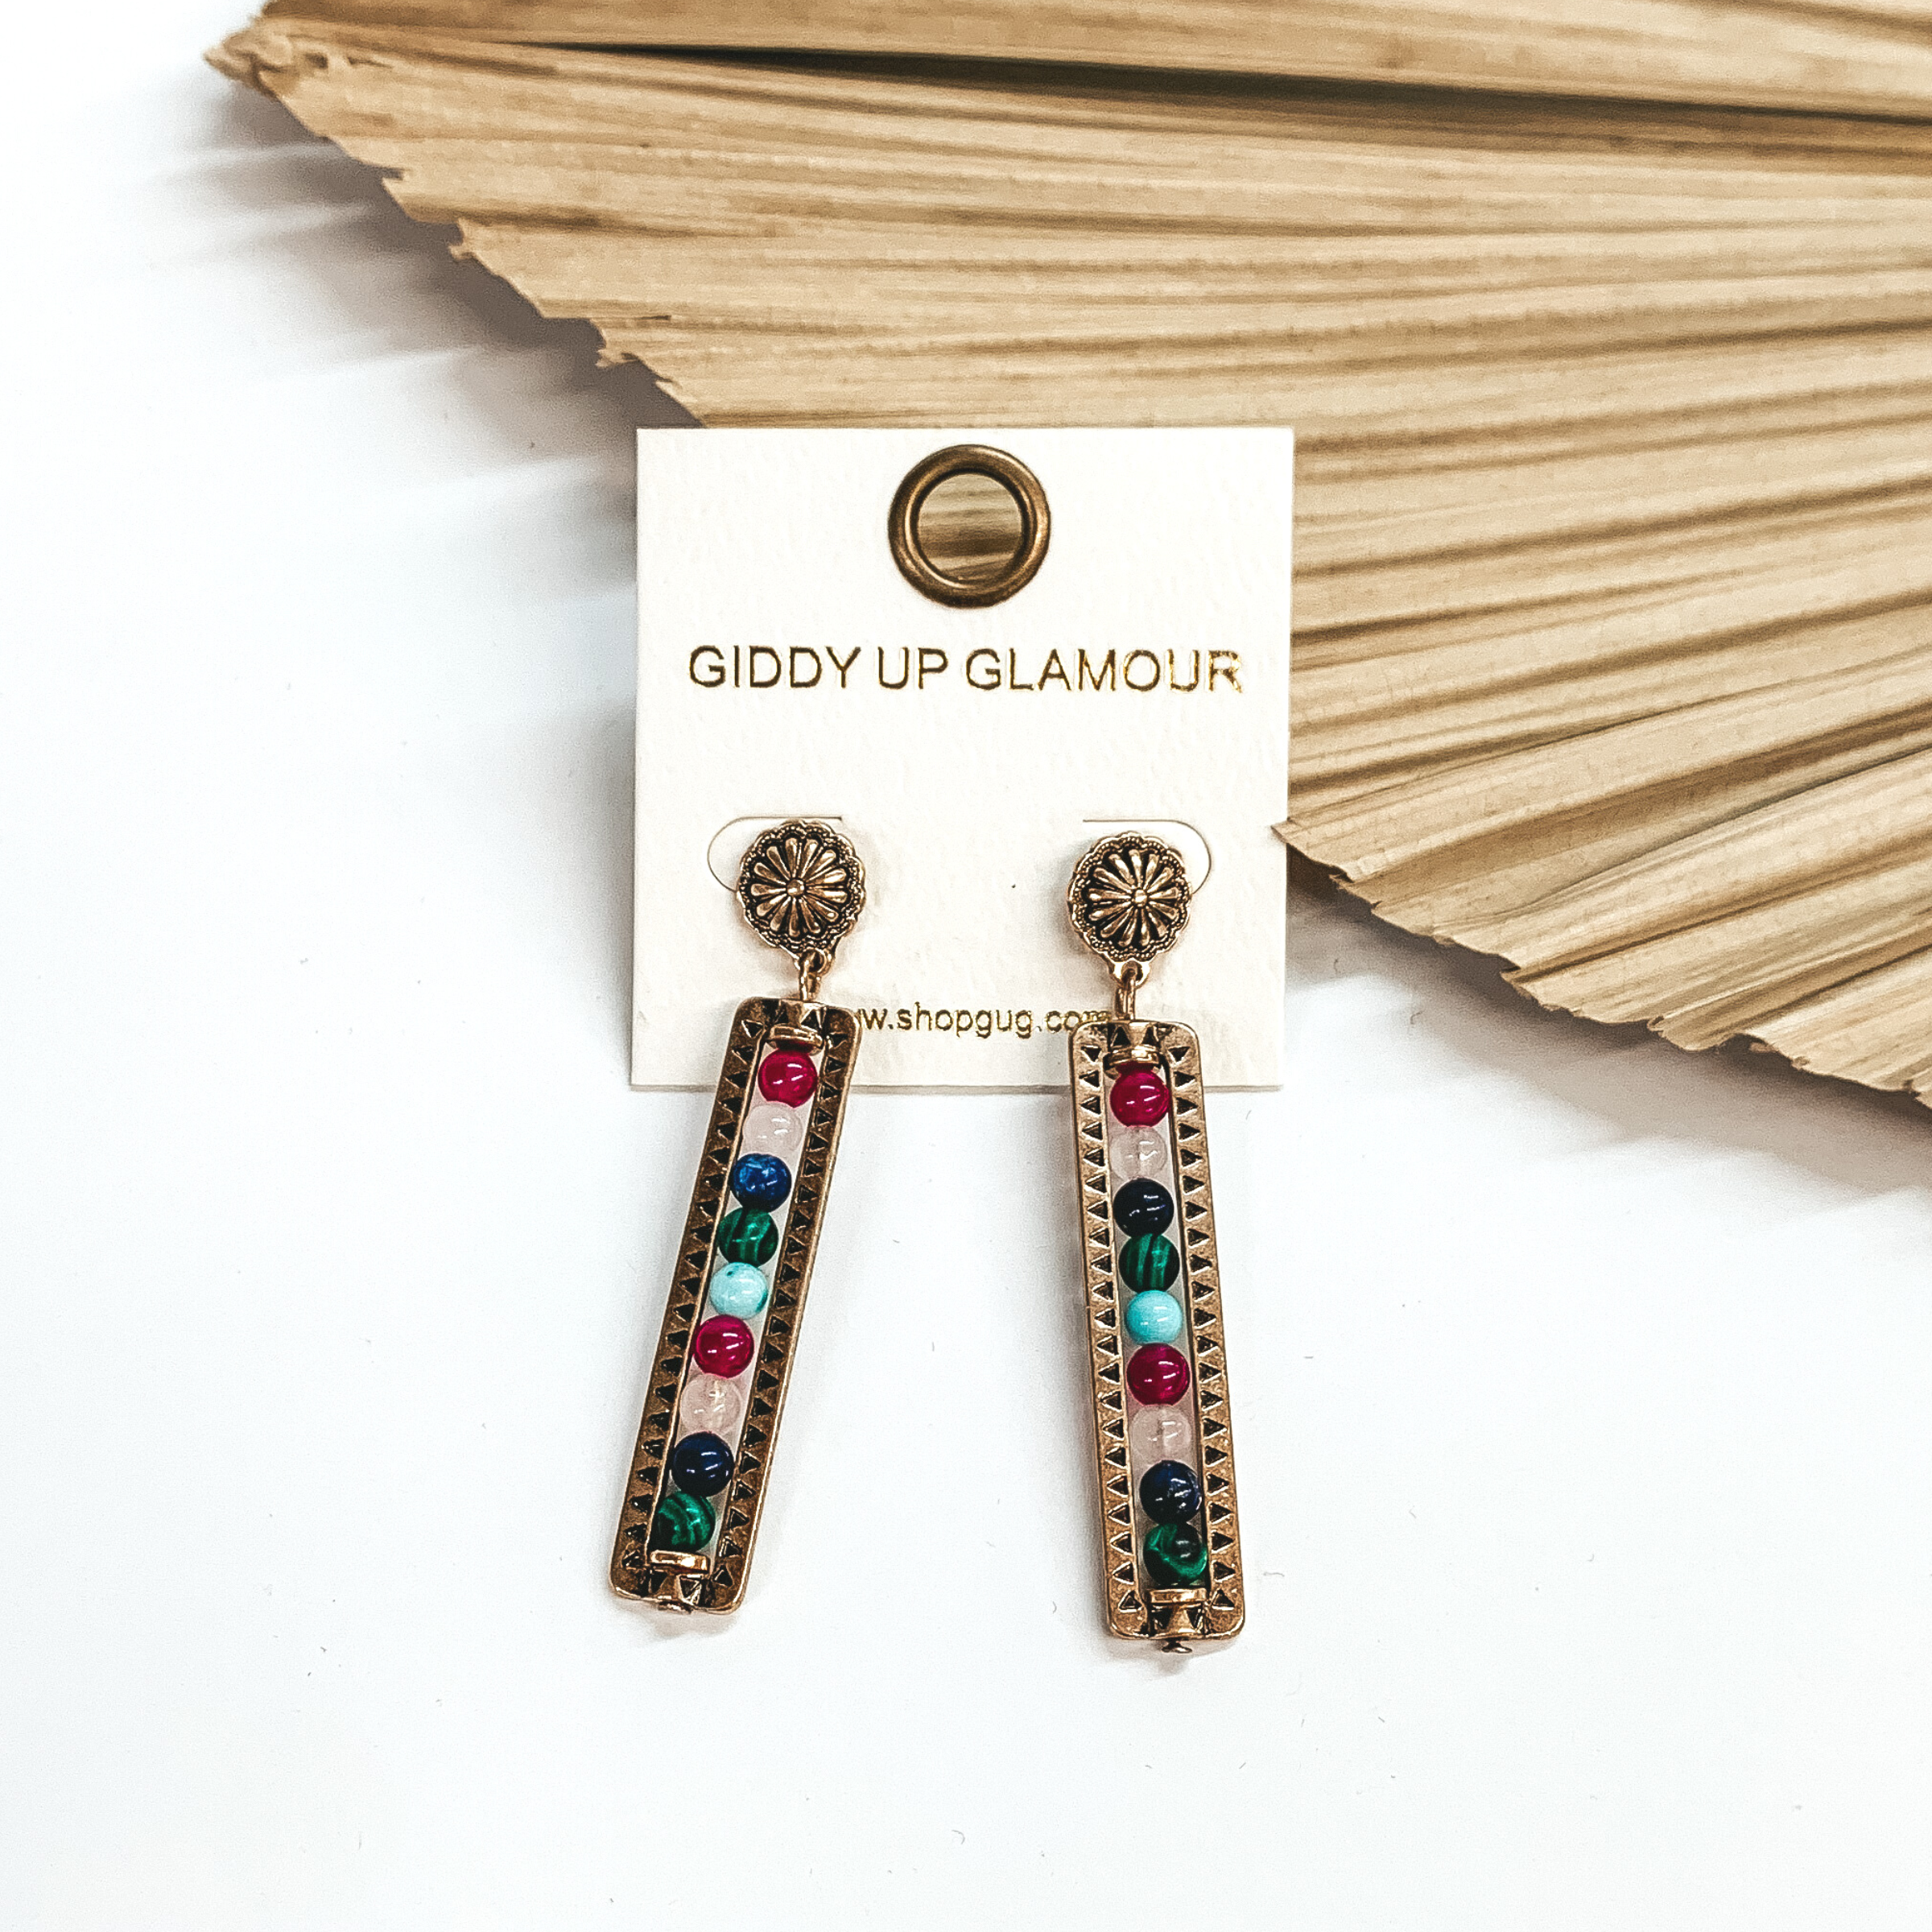 Gold small concho post earrings with a rectangle bar drop with  stone beads in multicolor and black detailing. Stone beads come in dark green,  navy blue, rose quarts, burgundy, and turquoise.  These earrings are taken leaning up  against a dried up palm leaf and a white background.